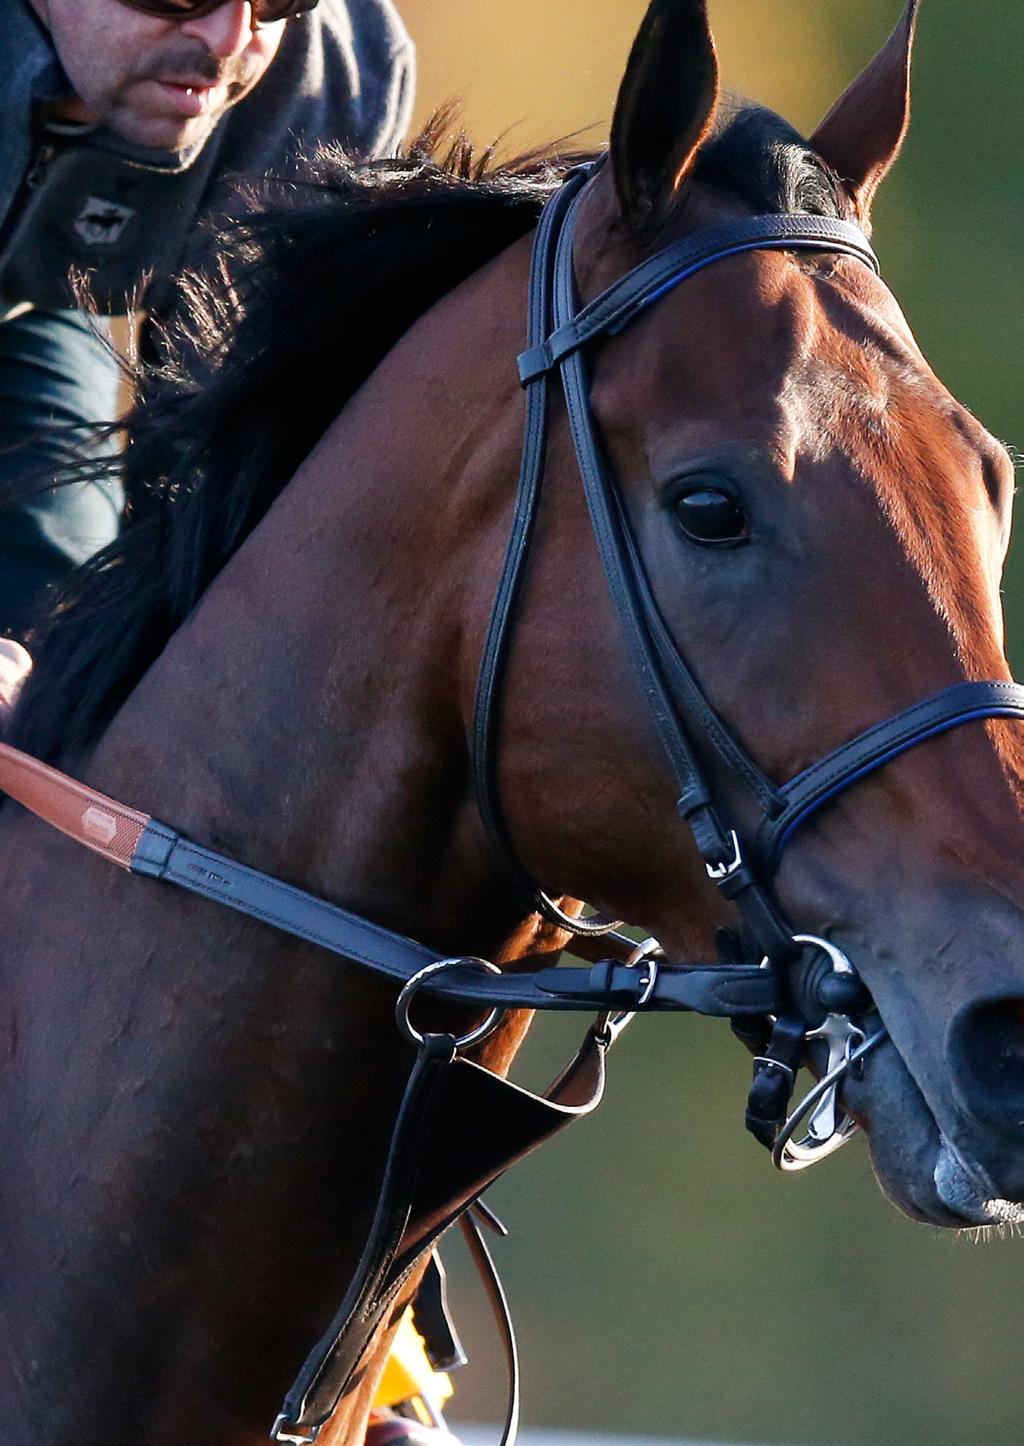 Born for the Belmont By derek Simoni When American Pharoah won the Belmont Stakes last year, he did something that has been accomplished just eight times since 1941.